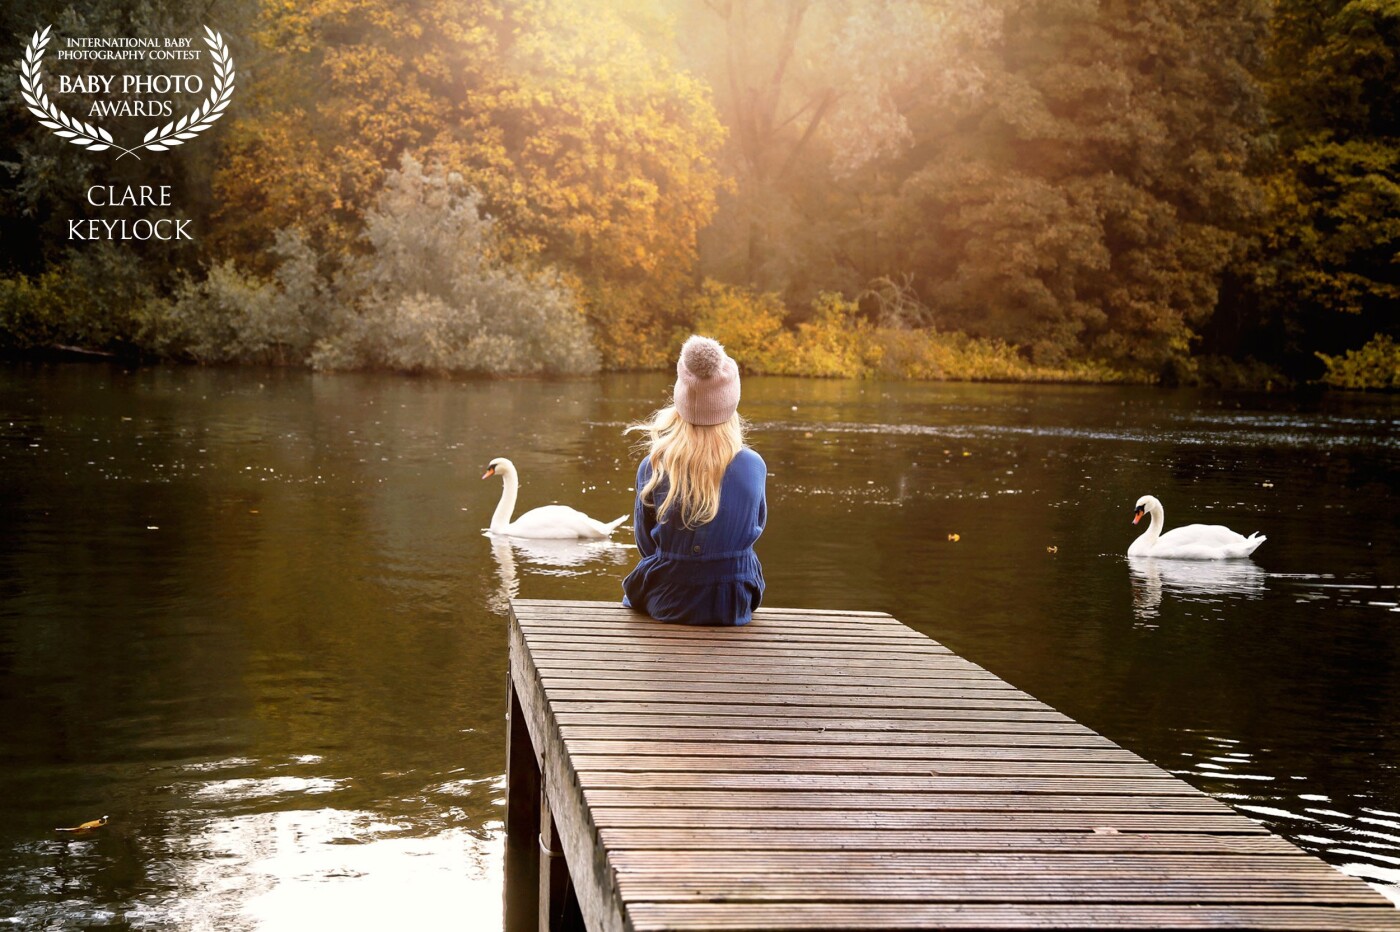 I had my eye on this gorgeous spot for a while to photograph my daughter. The light in the morning here is just stunning and the autumnal colors at this time of year are so beautiful. We were so delighted when these two beautiful swans came to see what we were up to. A really beautiful magical moment, one we won't forget.